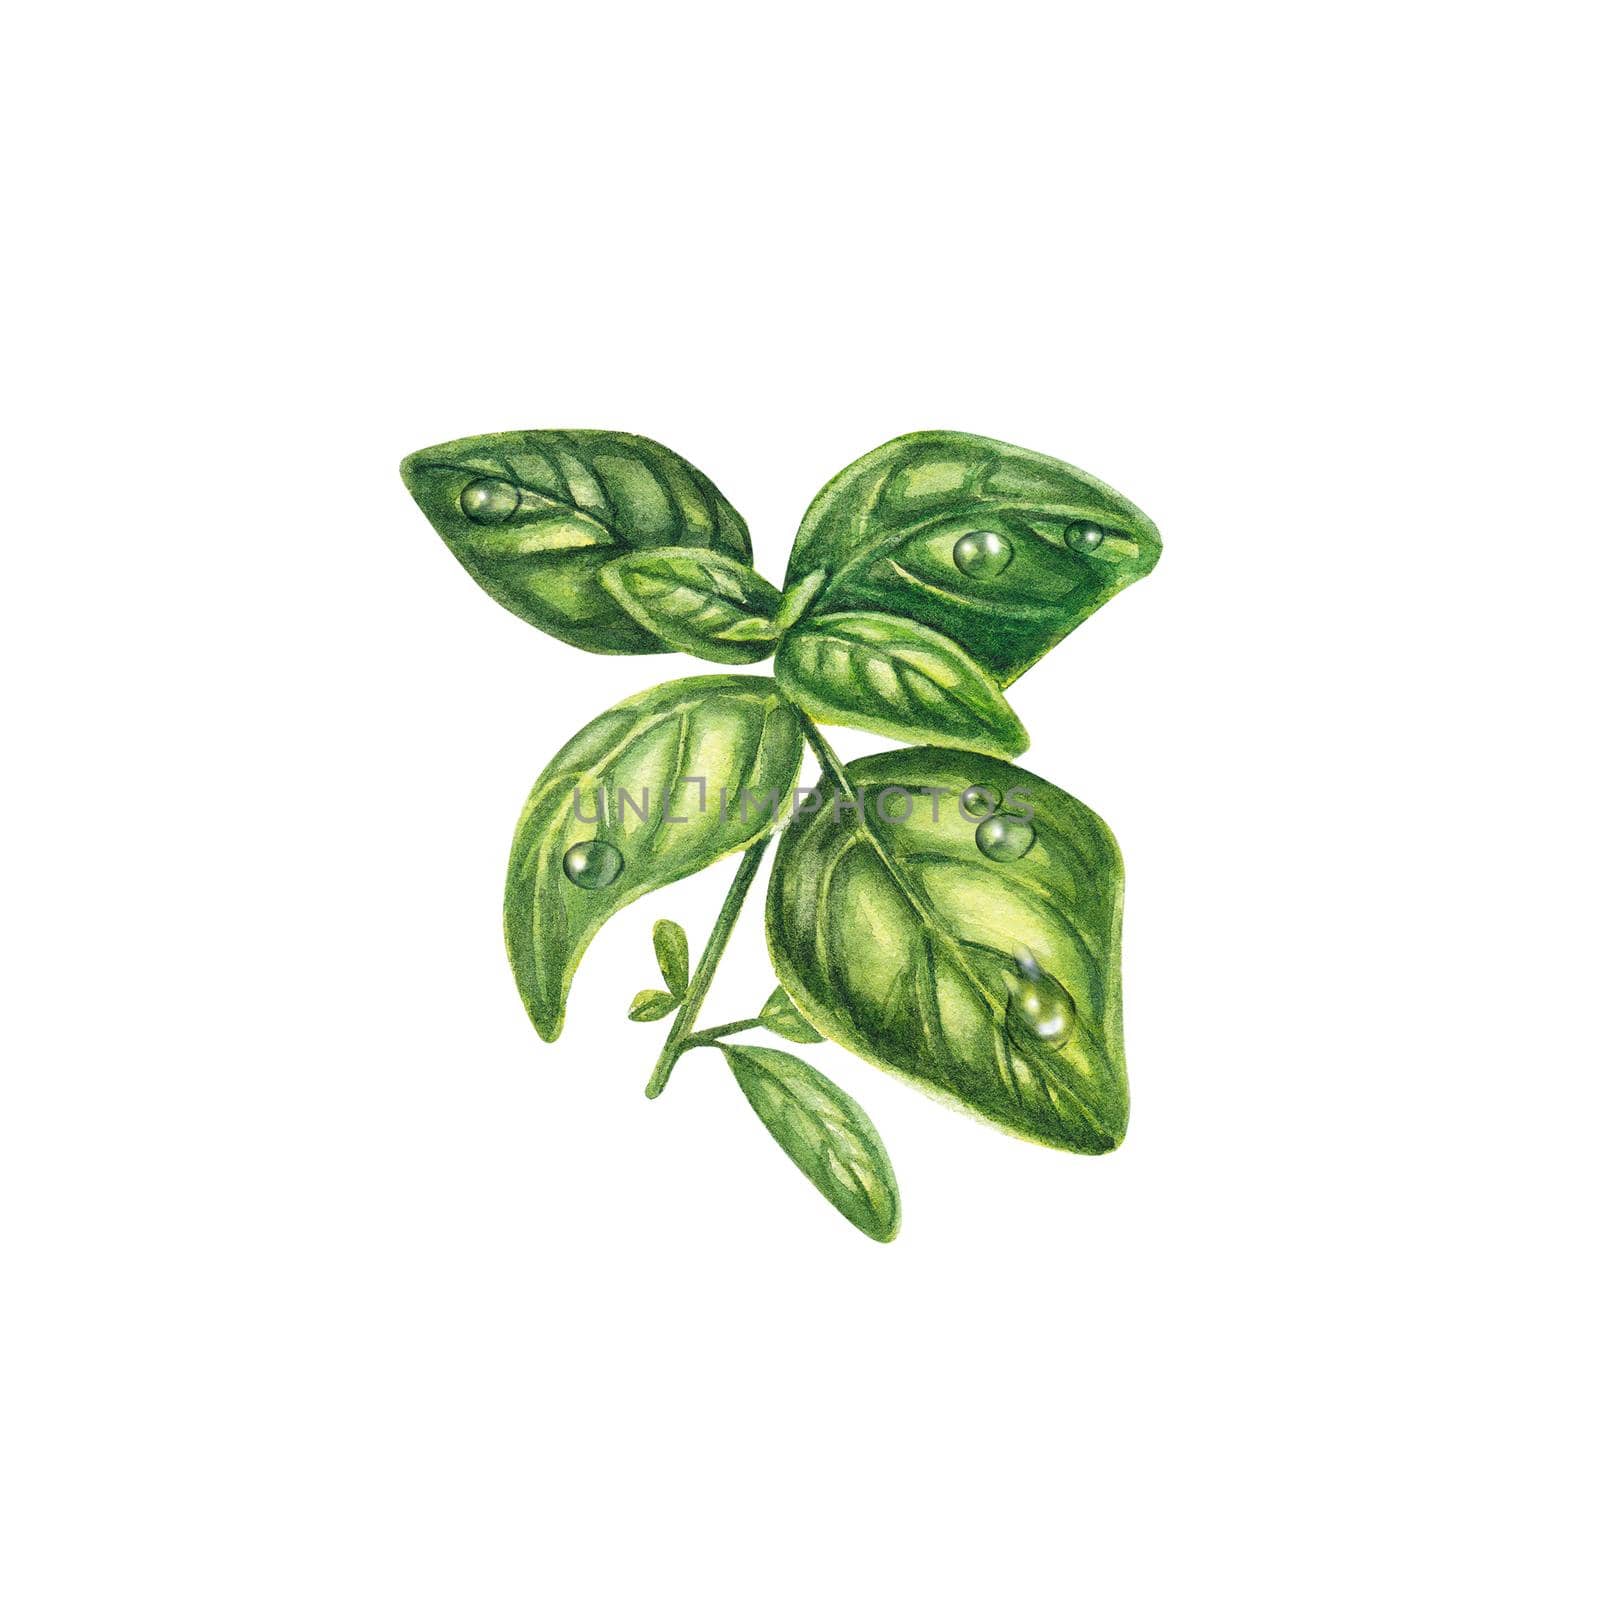 Basil in watercolor on a white background. A sprig of basil with drops of water. Fresh Provencal herbs and spices for cooking. Realistic plants. The illustration is suitable for design, invitations